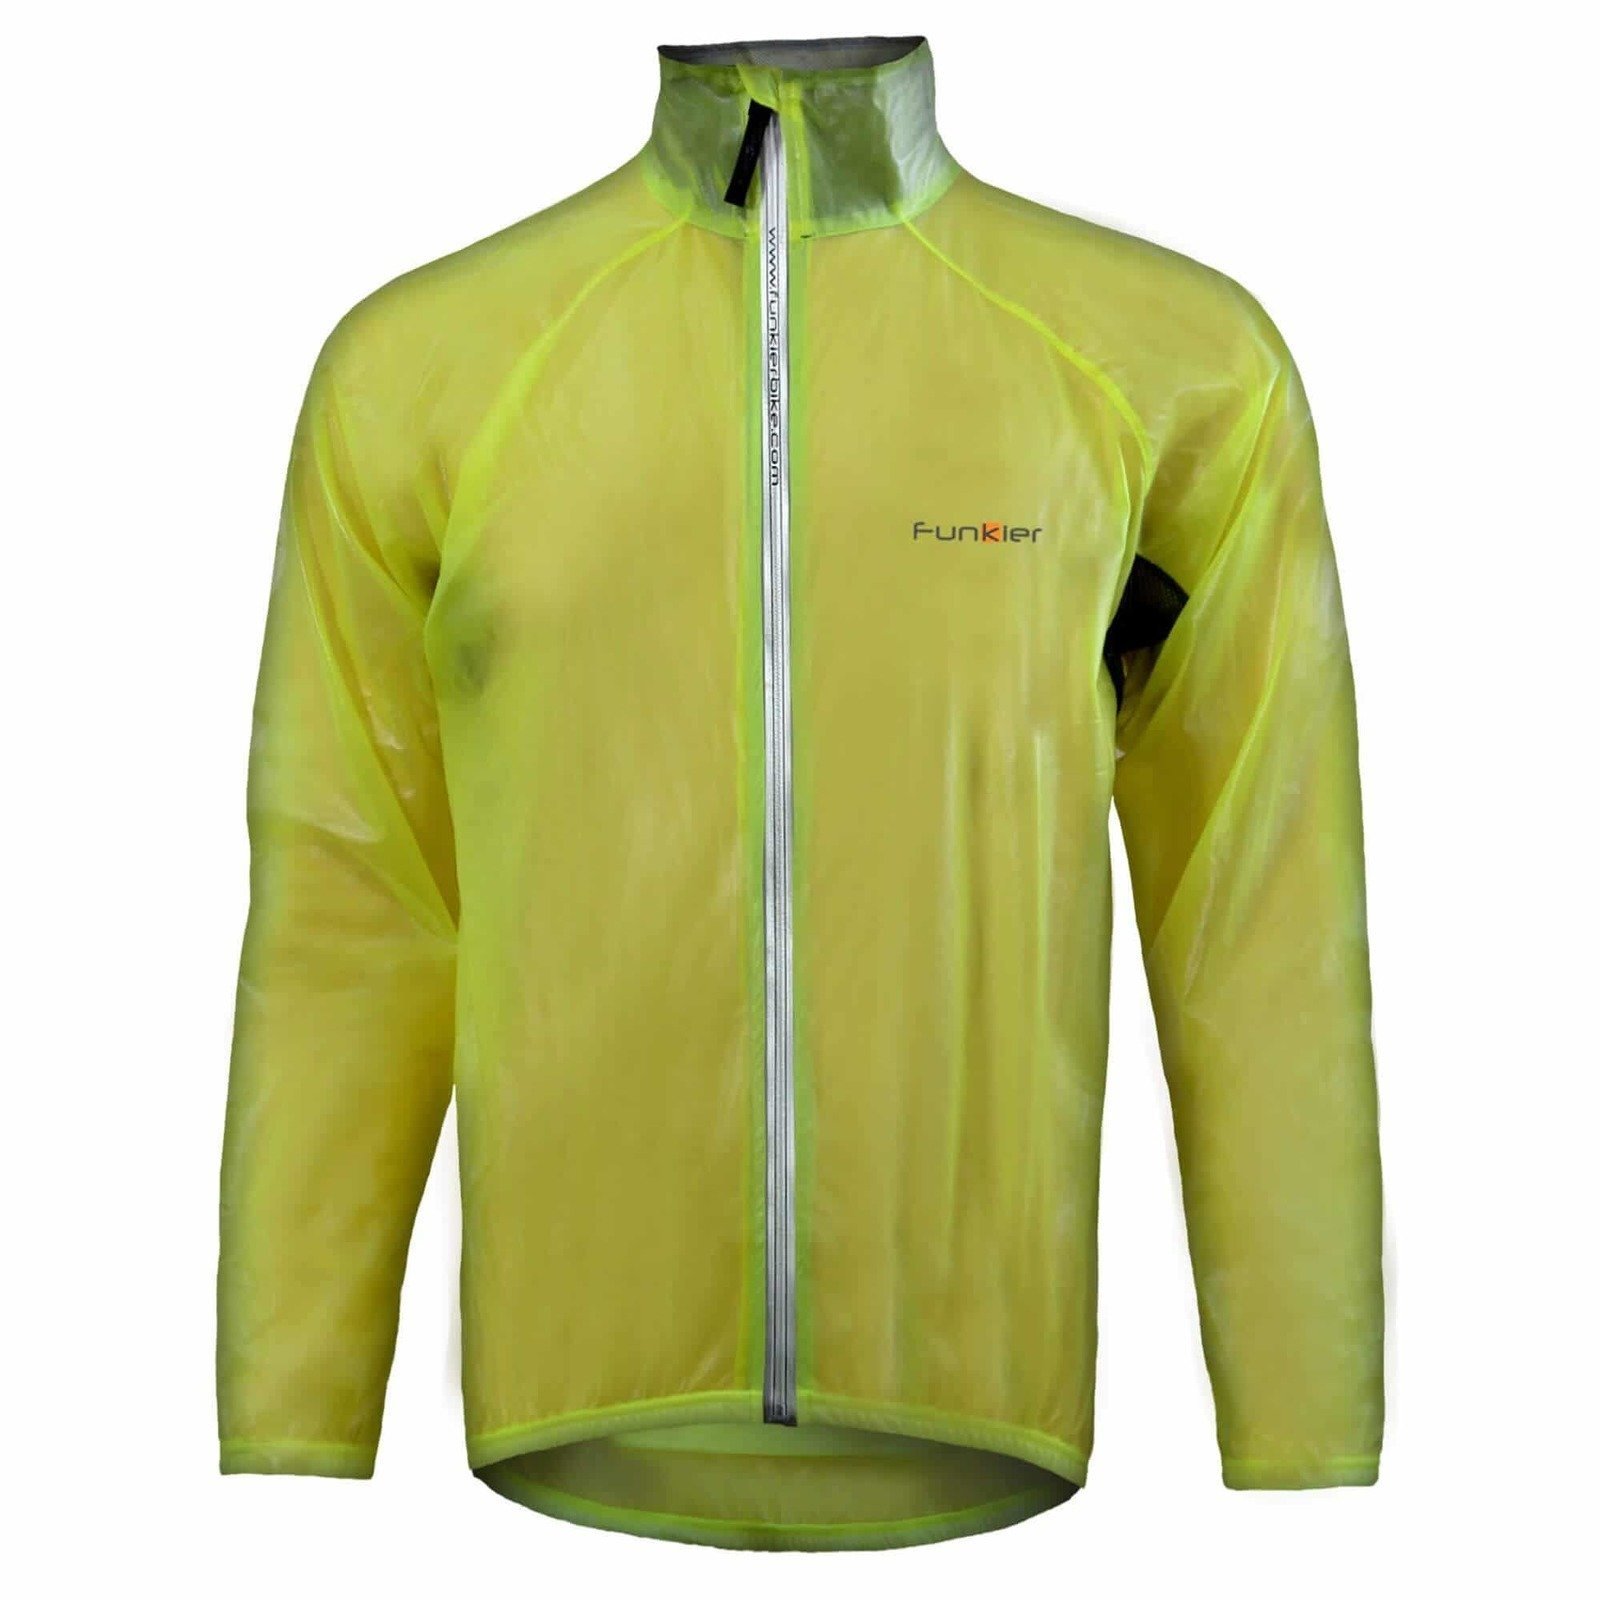 Giacca da ciclismo, gilet Funkier Lecco Clear Yellow M Giacca